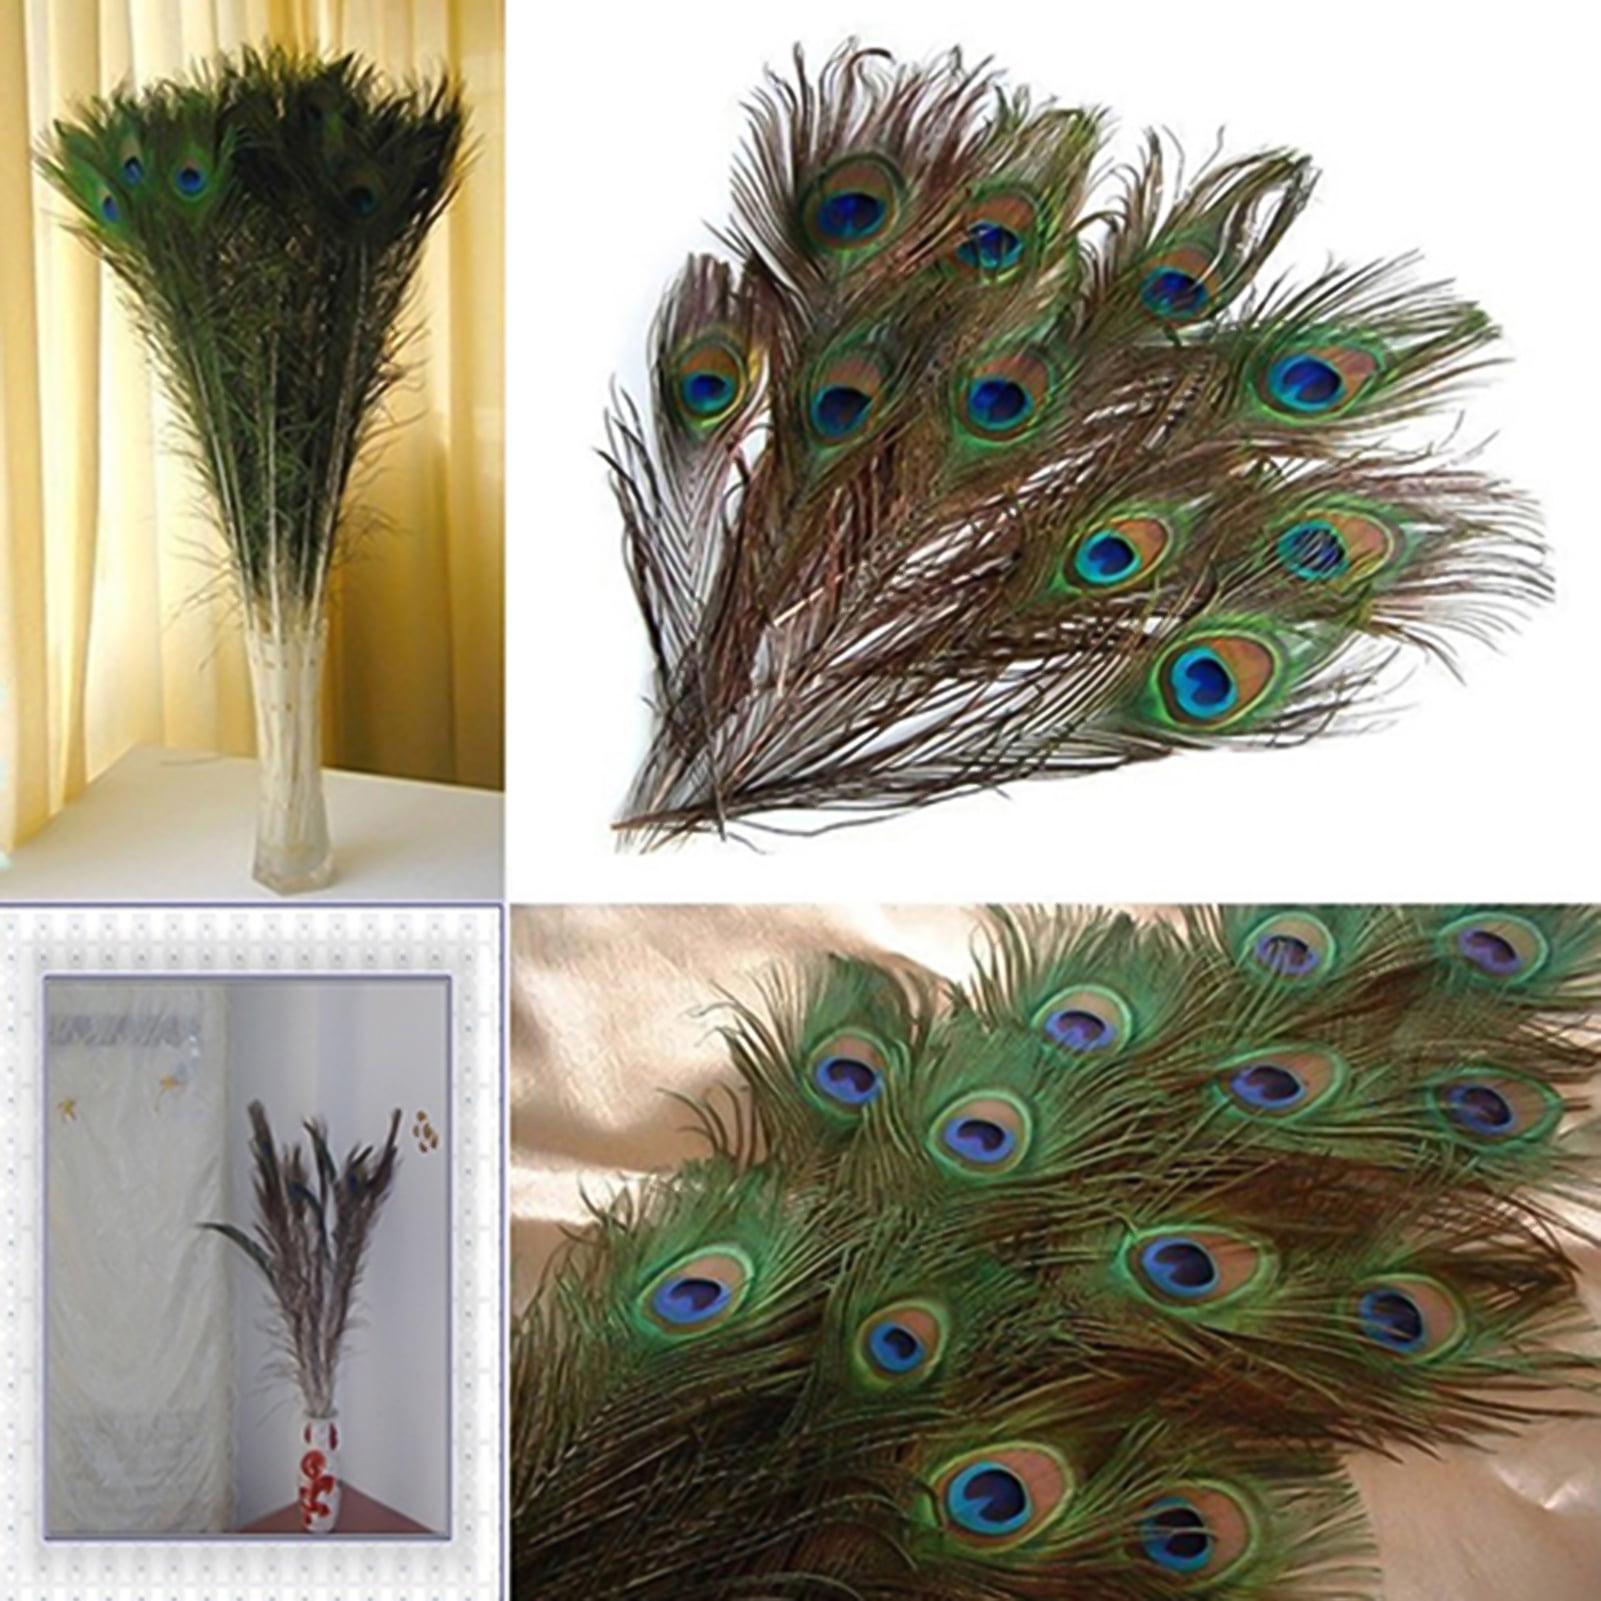 10Pcs Natural Peacock Tail Feathers DIY Festival Wedding Party Home Decoration 